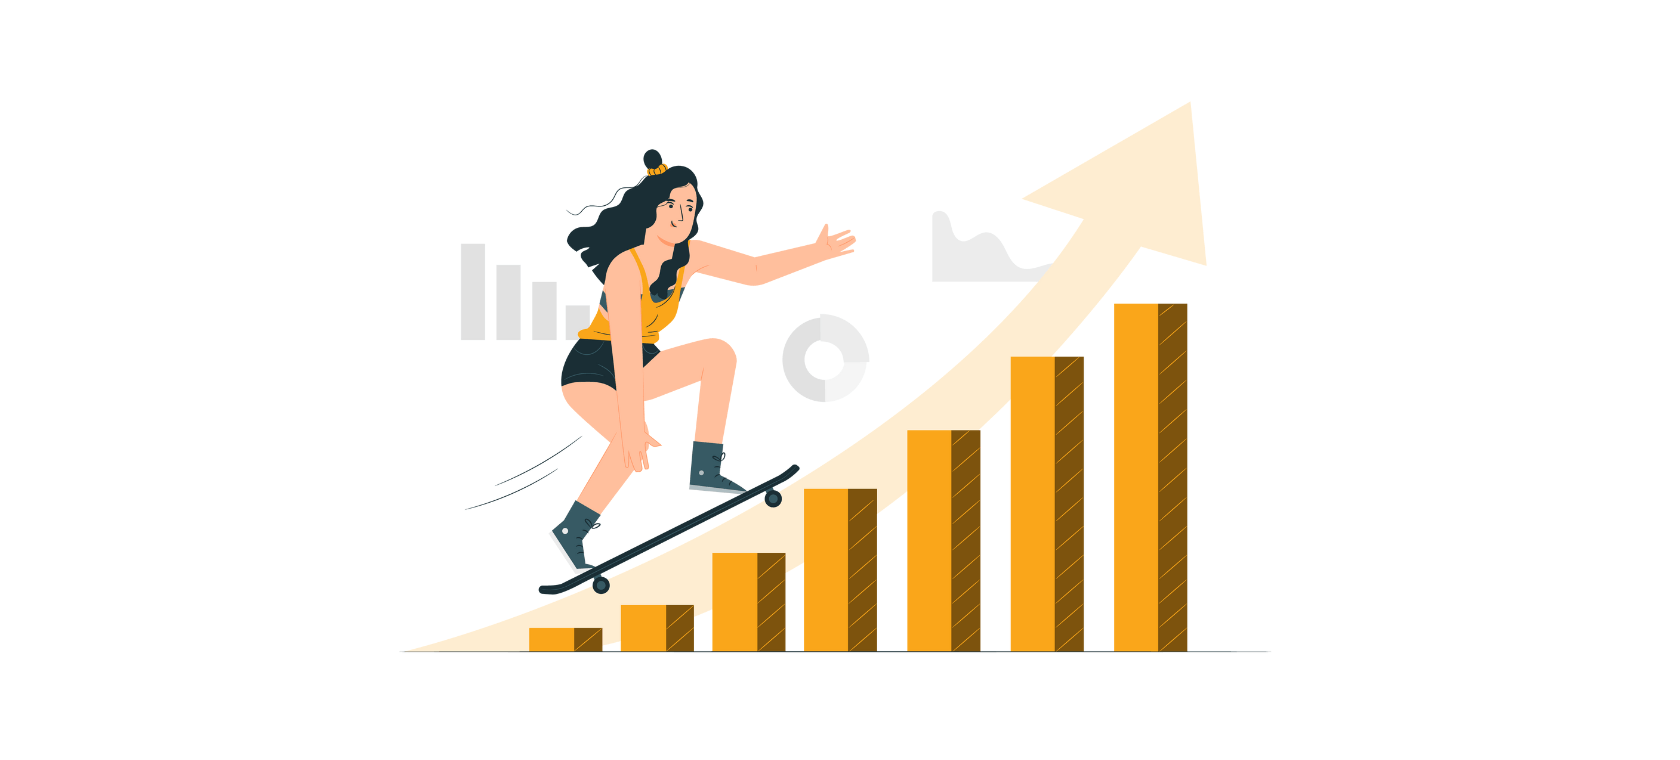 The illustration shows a girl on a skateboard moving up the chart.